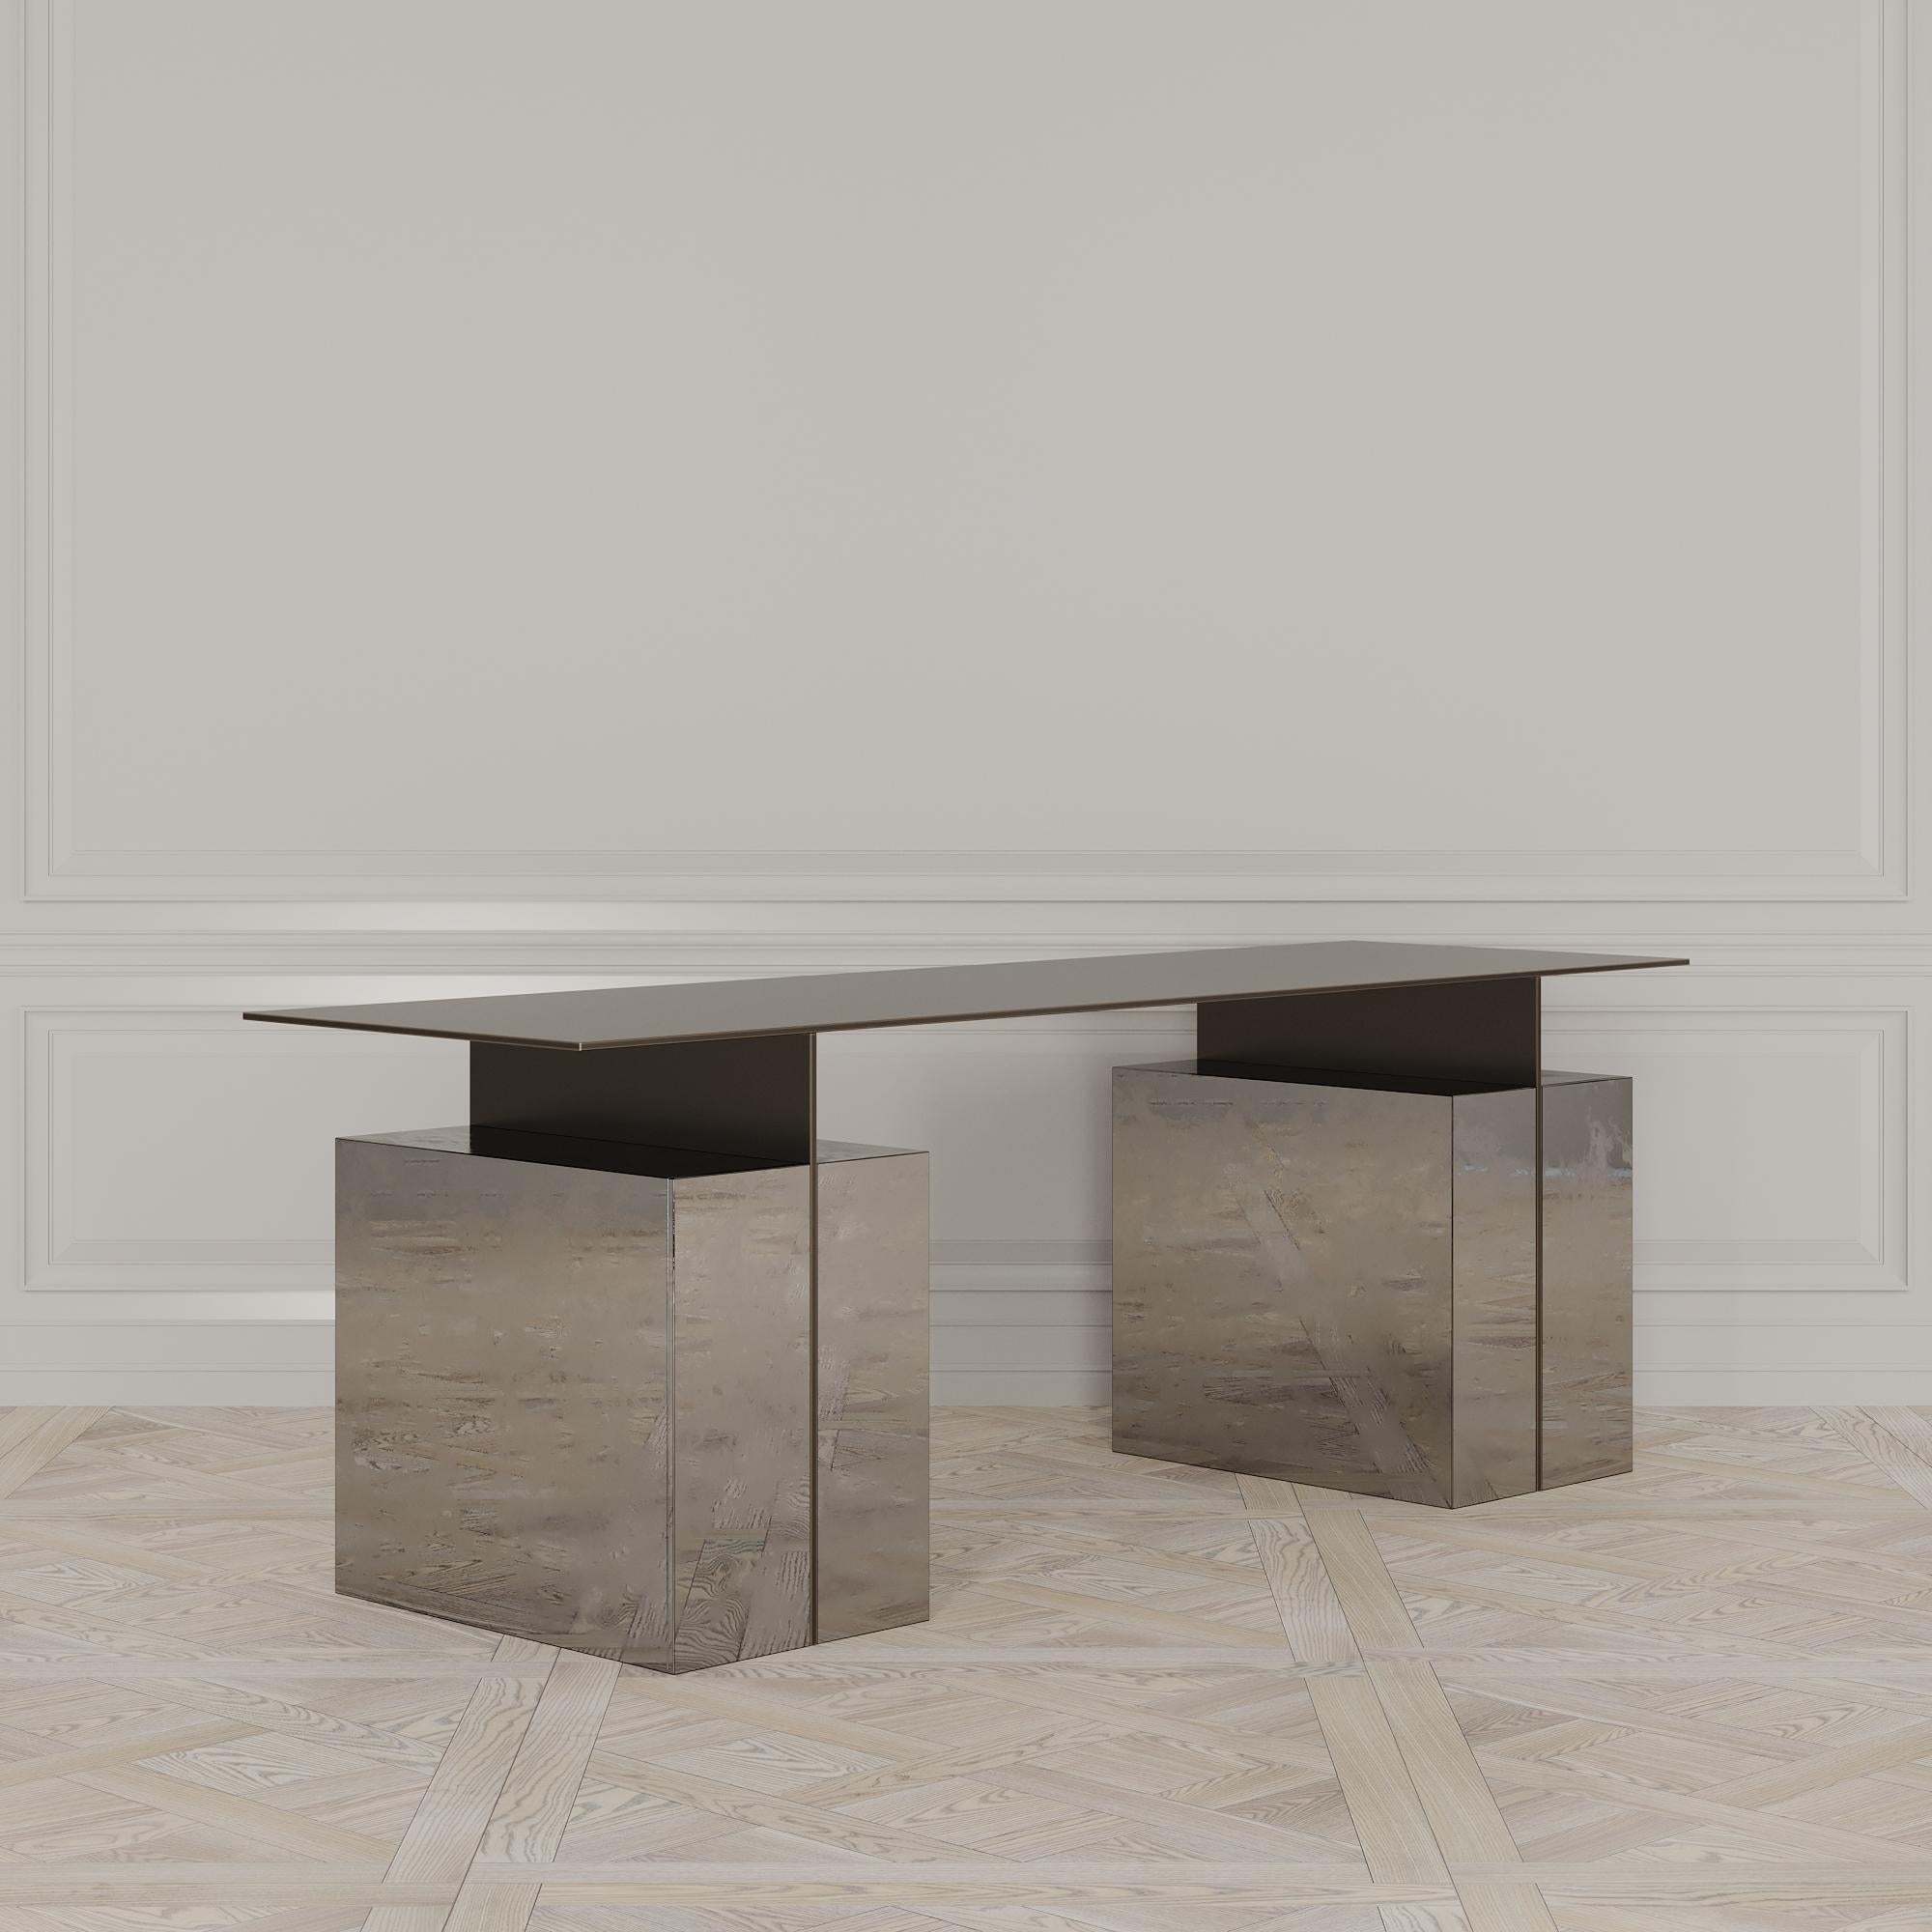 The Meridiem desk is designed by Emél & Browne in the minimalist and contemporary style and custom made in Italy by skilled artisans. The Meridiem desk reflects the transition from midnight to the coming dawn. The essence of this transcendent time